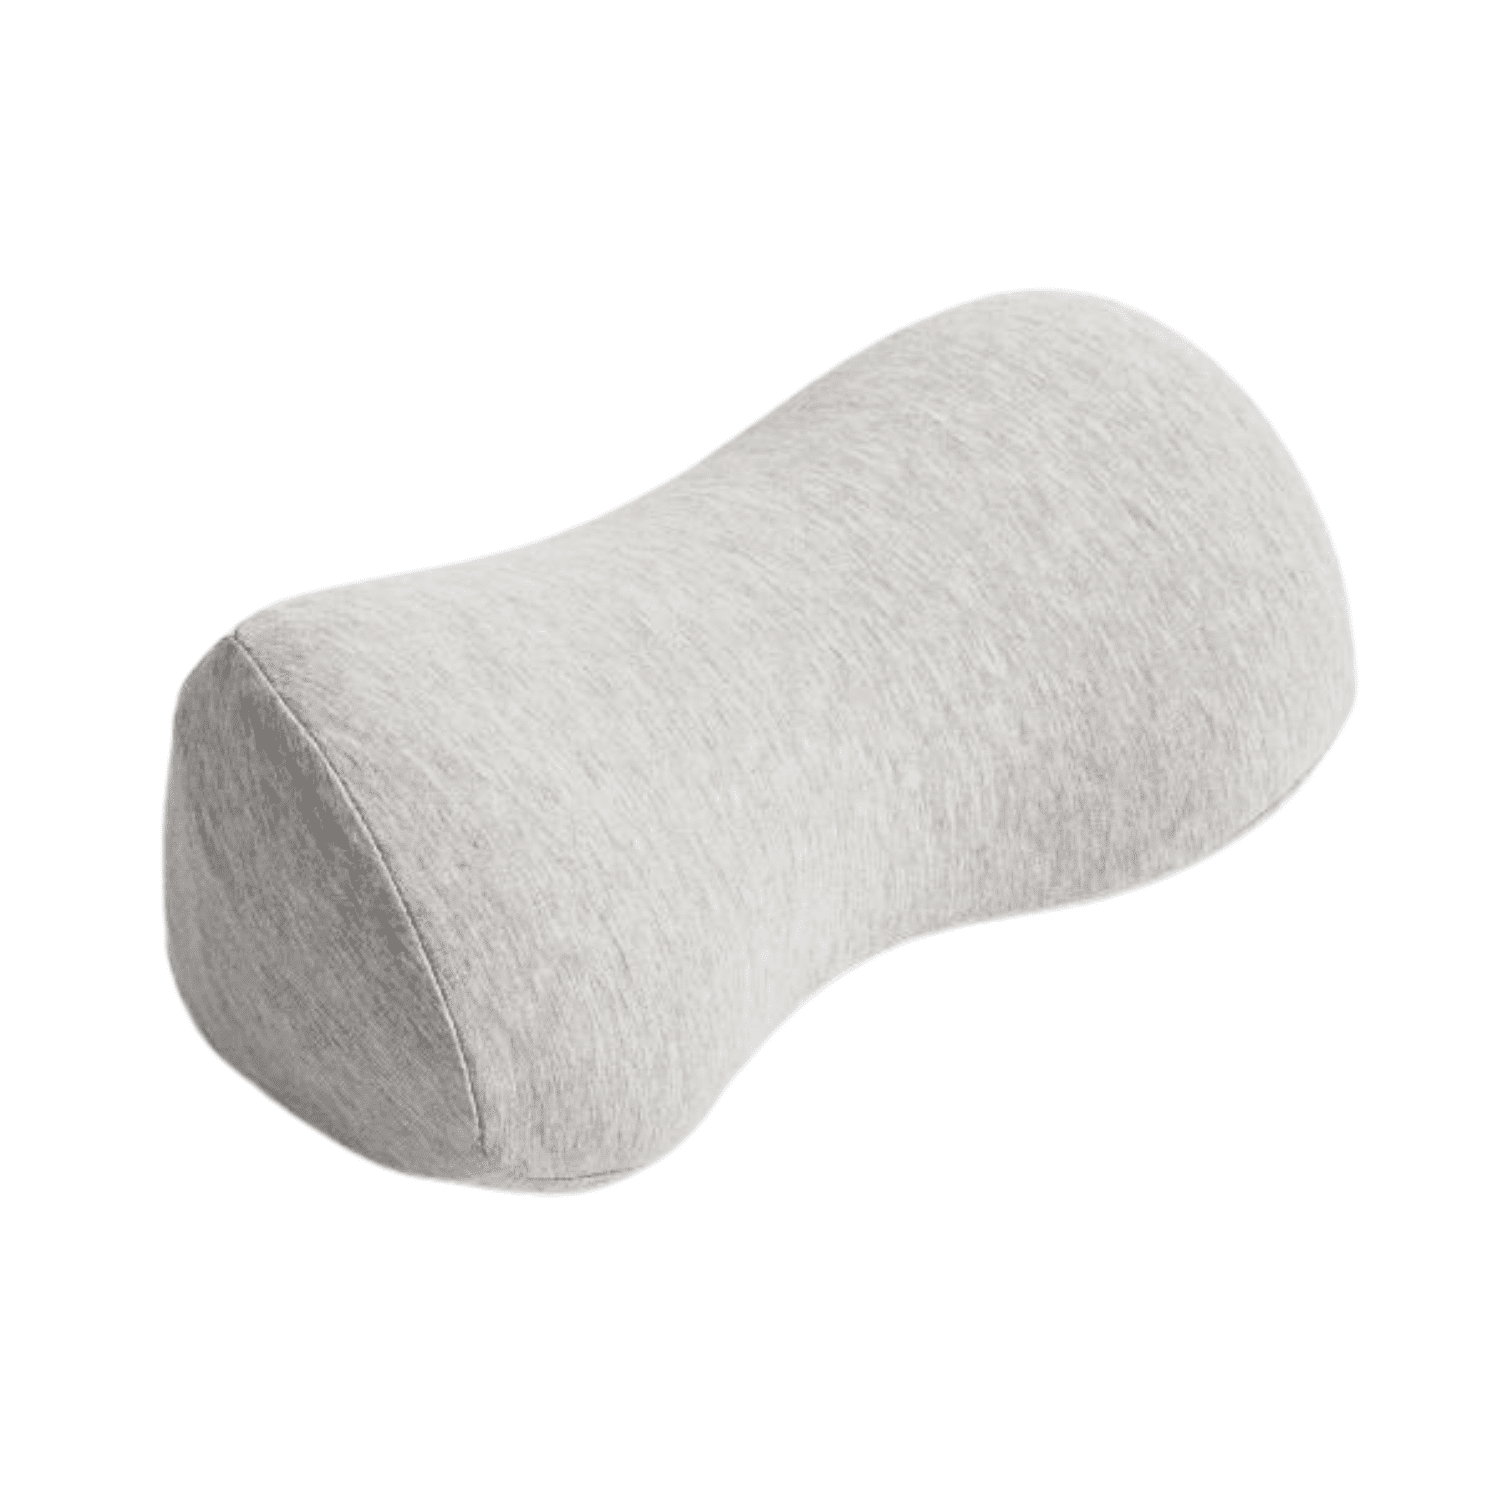 iCare Reform Neck Support Cushion